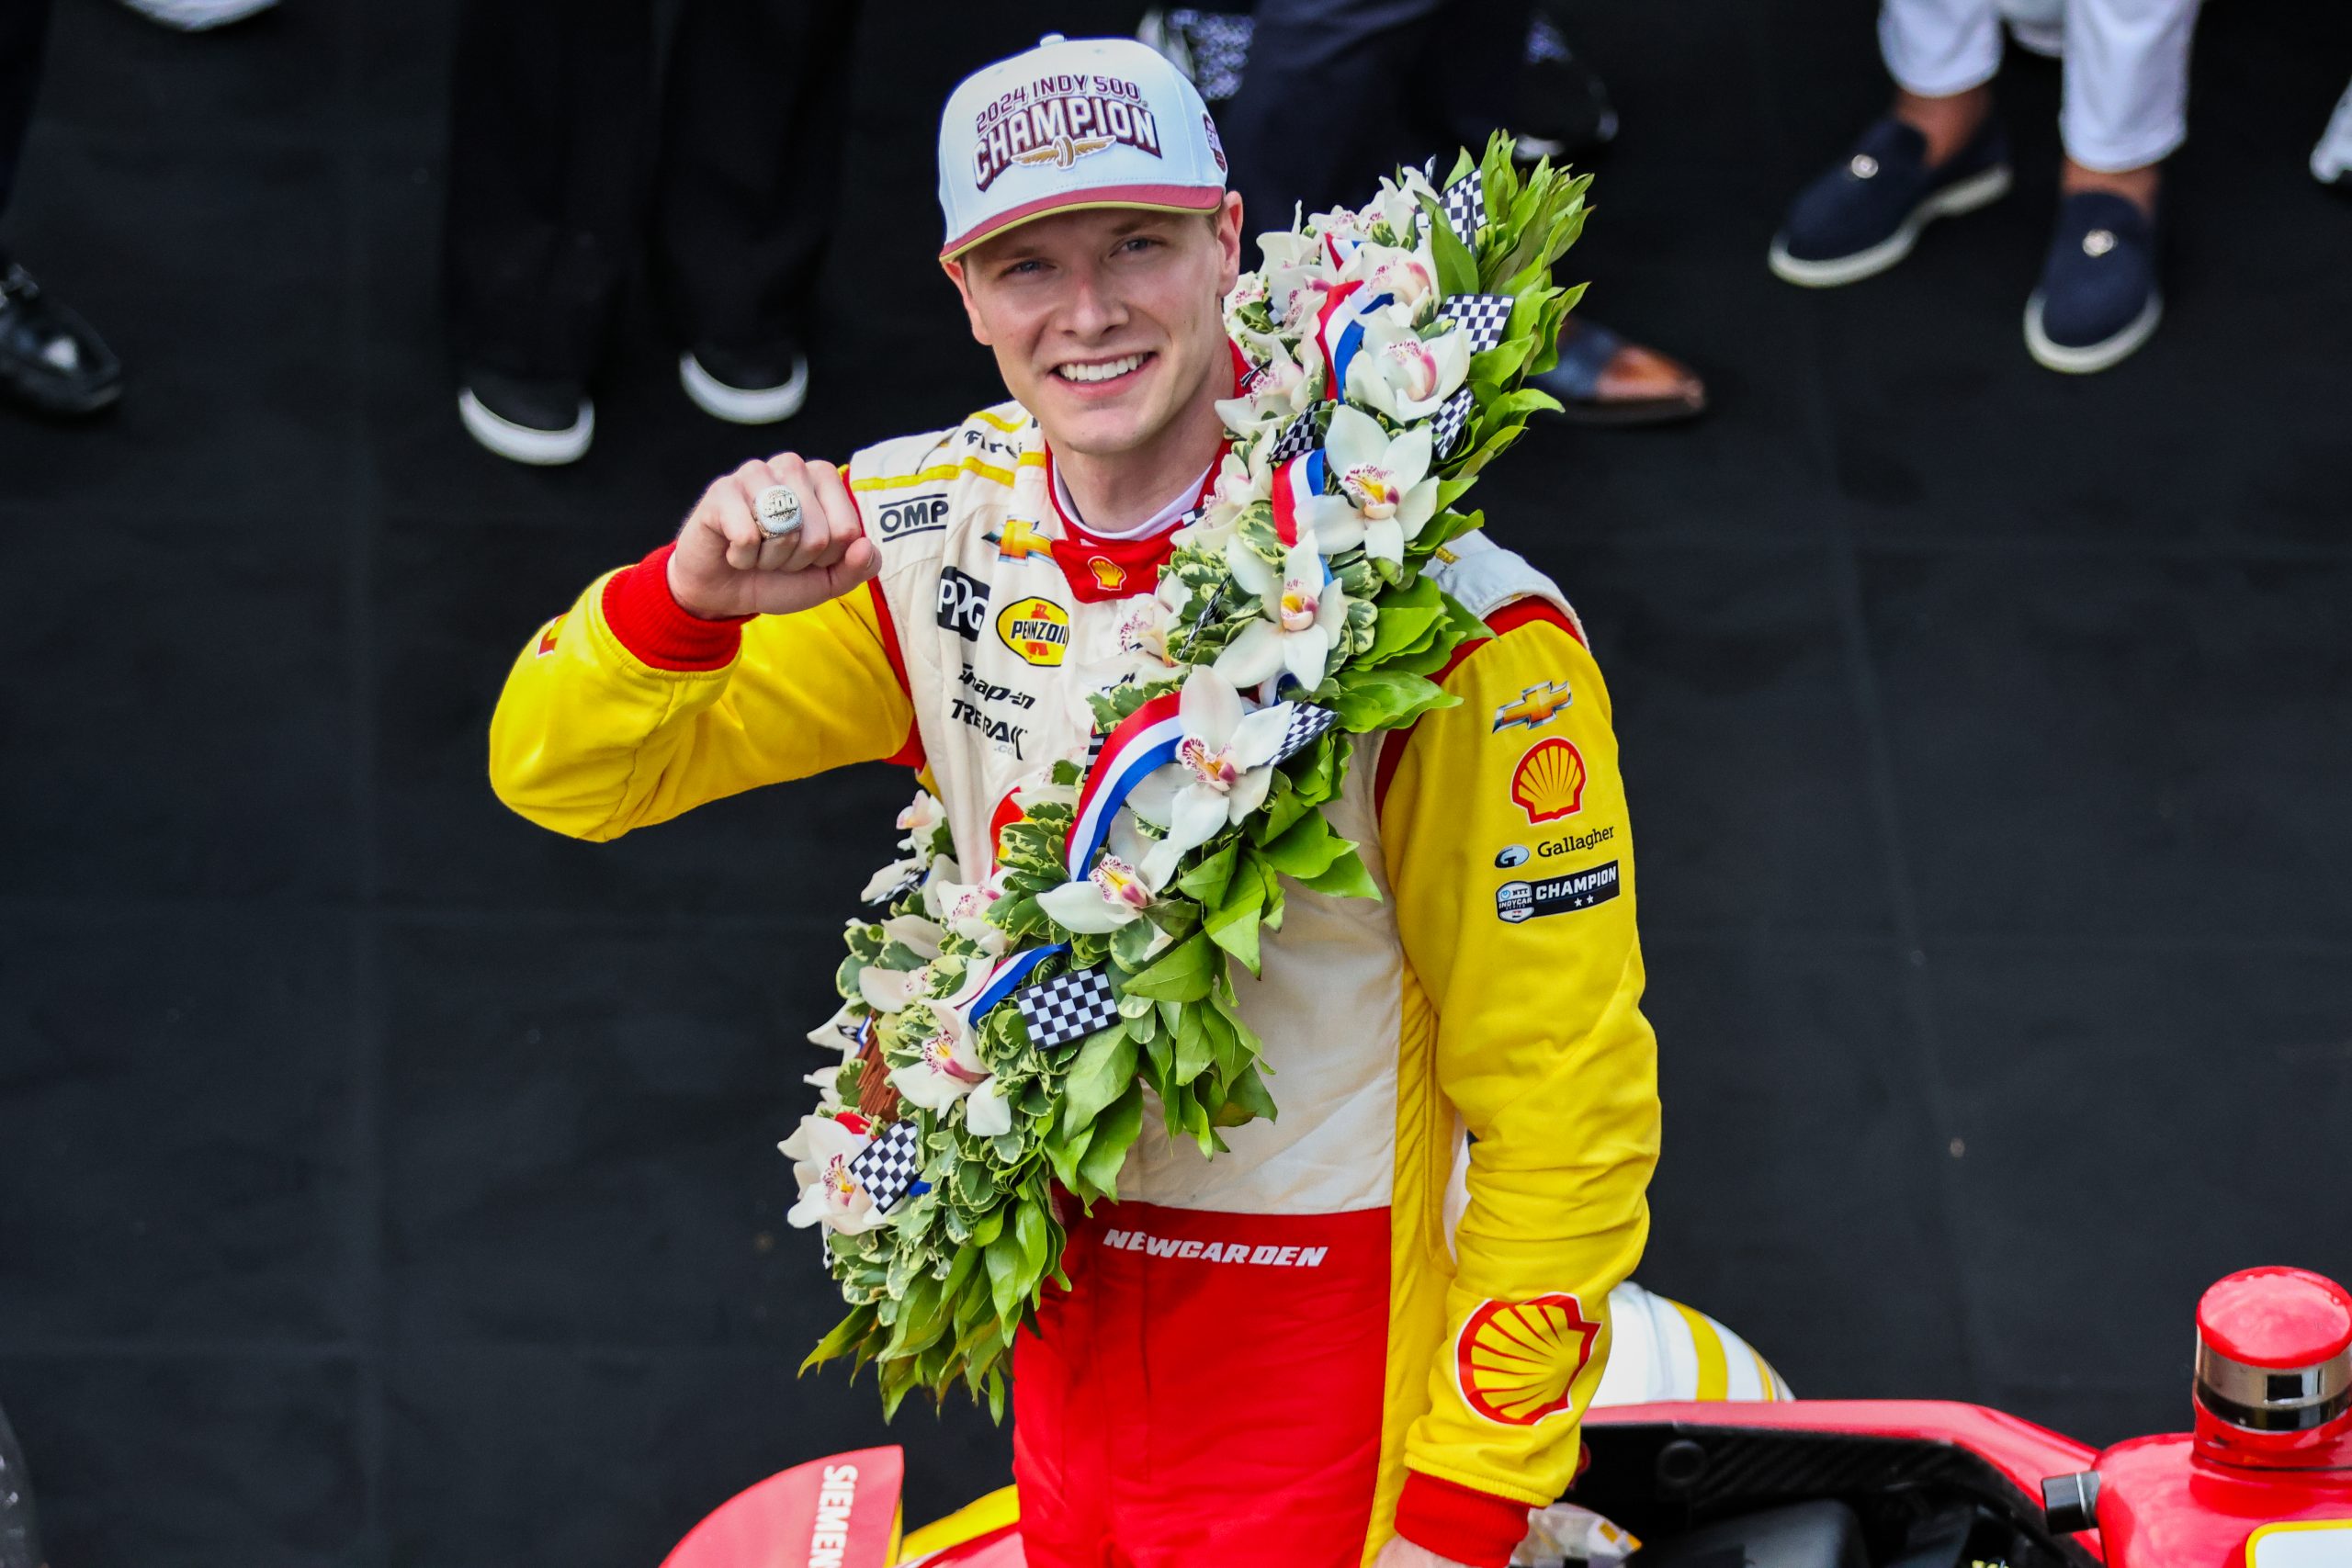 Josef Newgarden won his second consecutive Indianapolis 500, the first driver to do so since Helio Castroneves in 2001 and 2002. (Photo: Wayne Riegle | The Podium Finish)